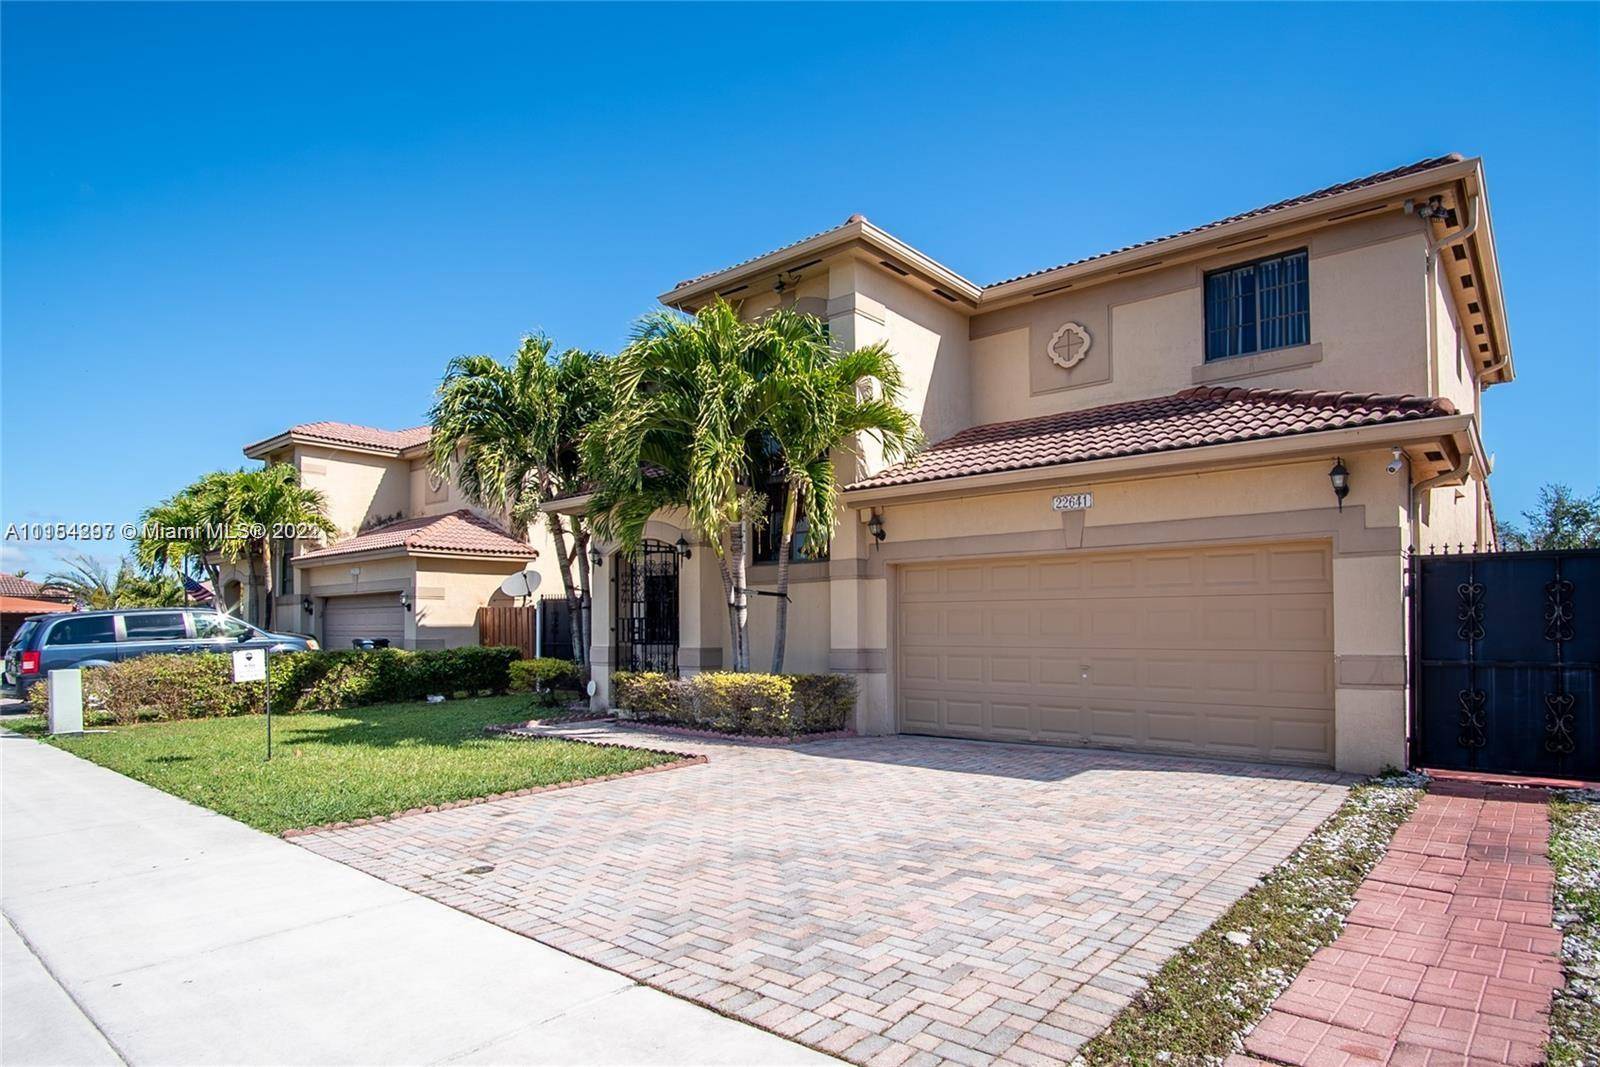 Beautiful 2 story home in Cutler Bay.